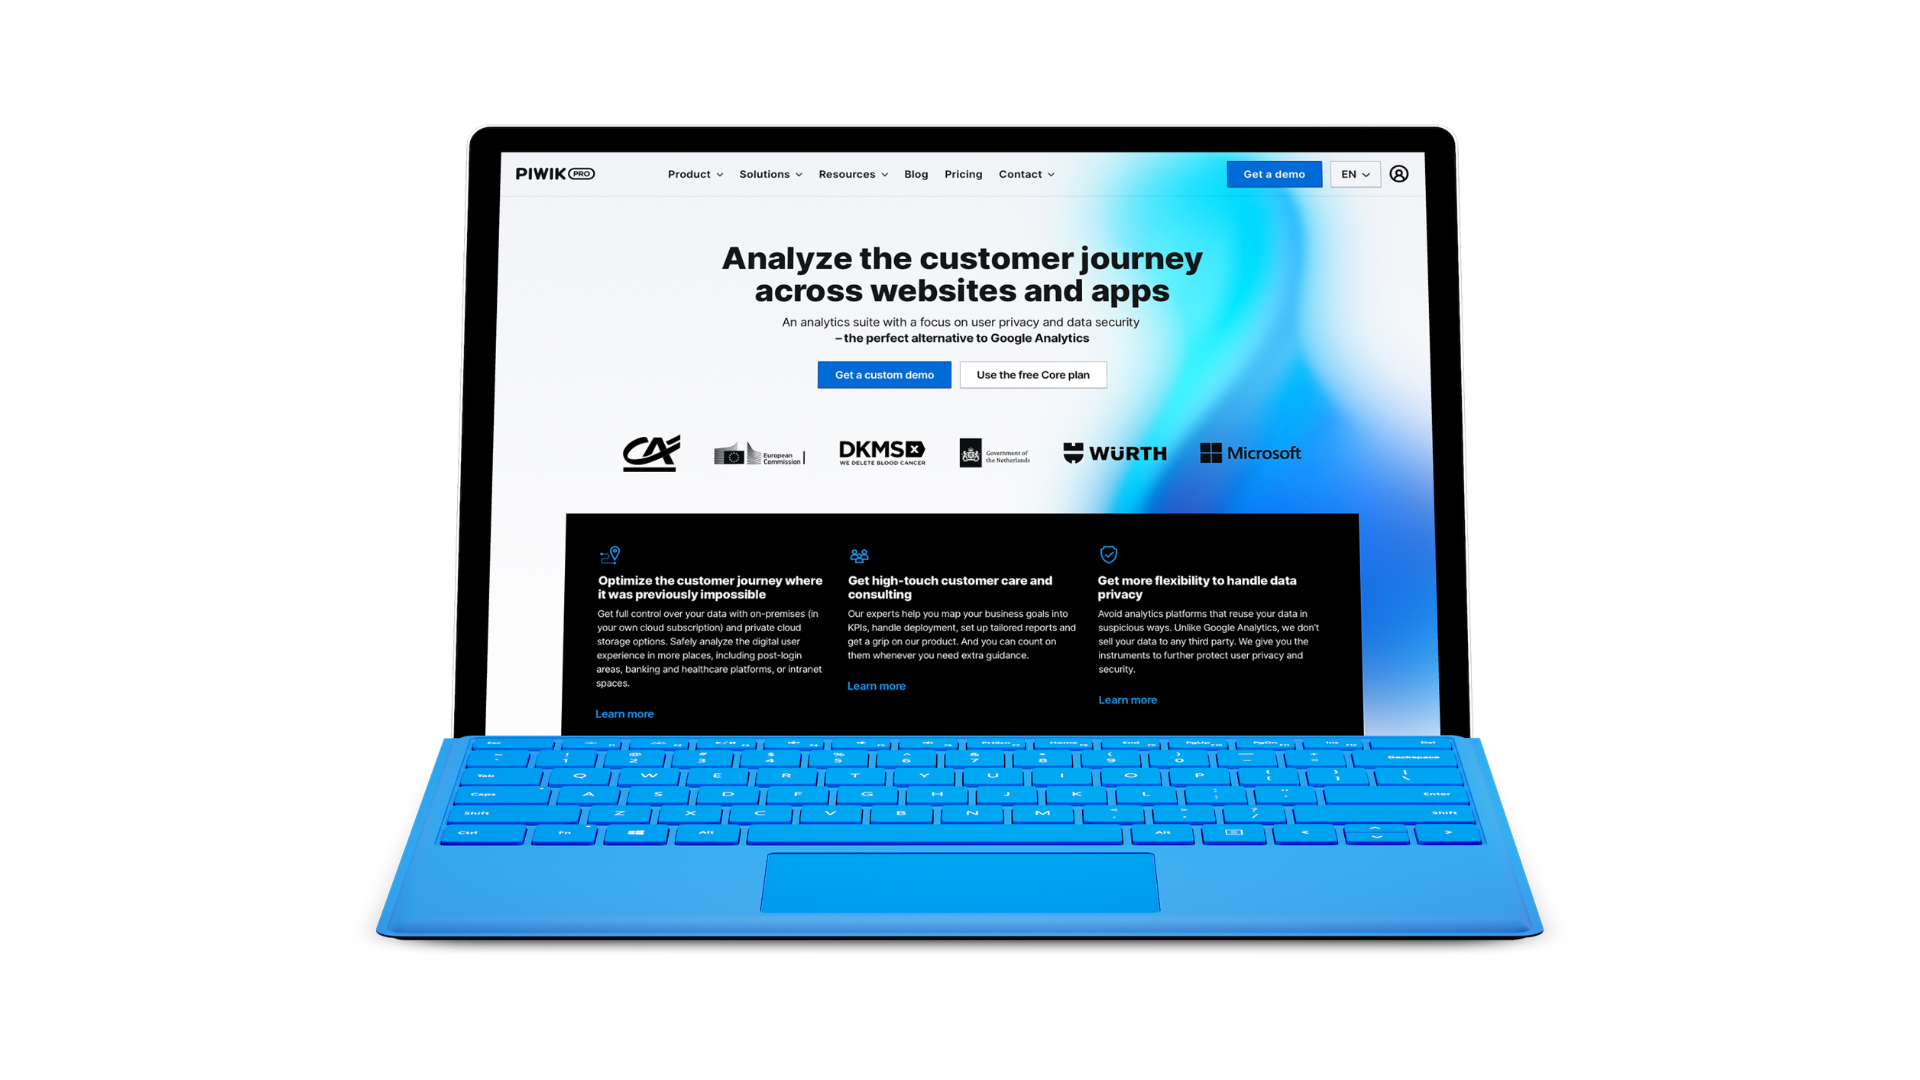 Tag Manager  Piwik PRO Analytics Suite